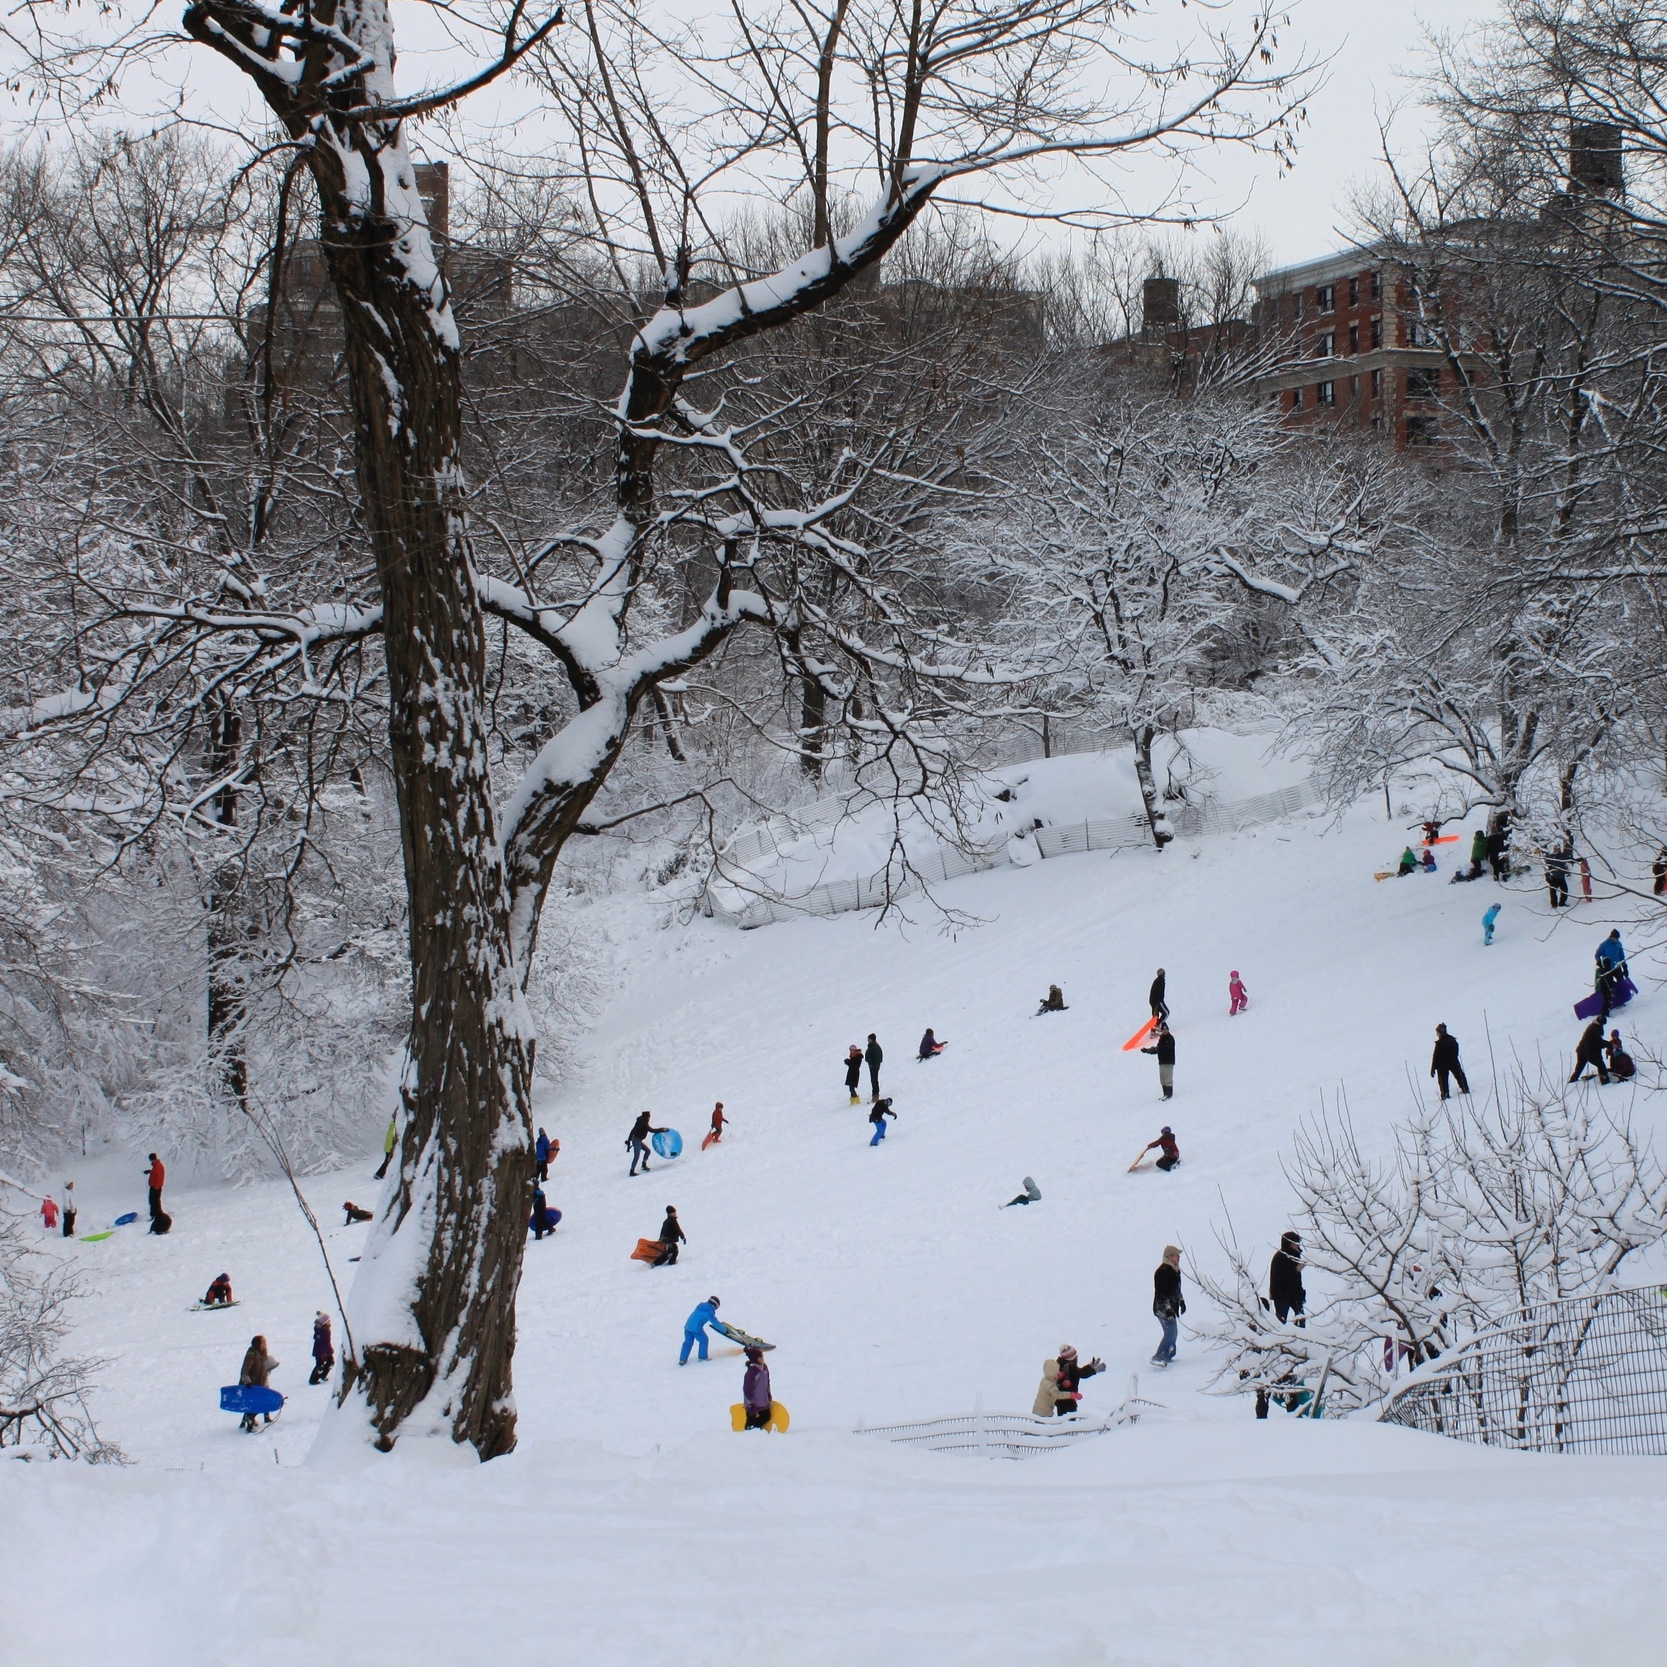 Sledding in a nearby park